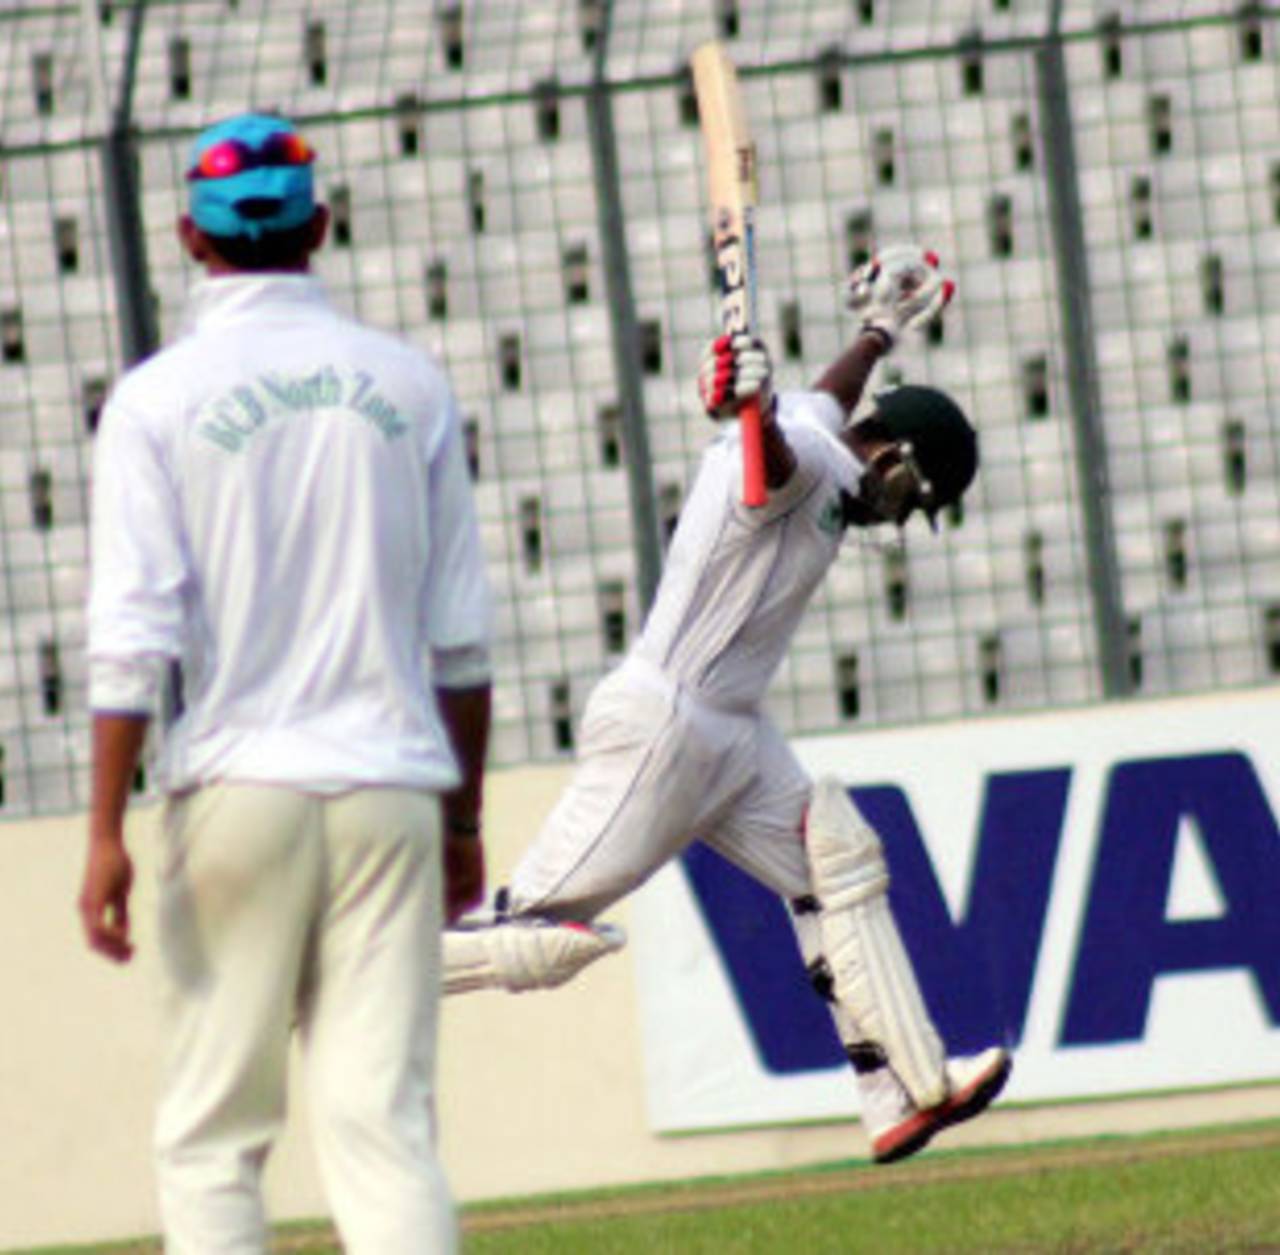 Imrul Kayes put South Zone in a commanding position after scoring his maiden first-class double-century&nbsp;&nbsp;&bull;&nbsp;&nbsp;BCB